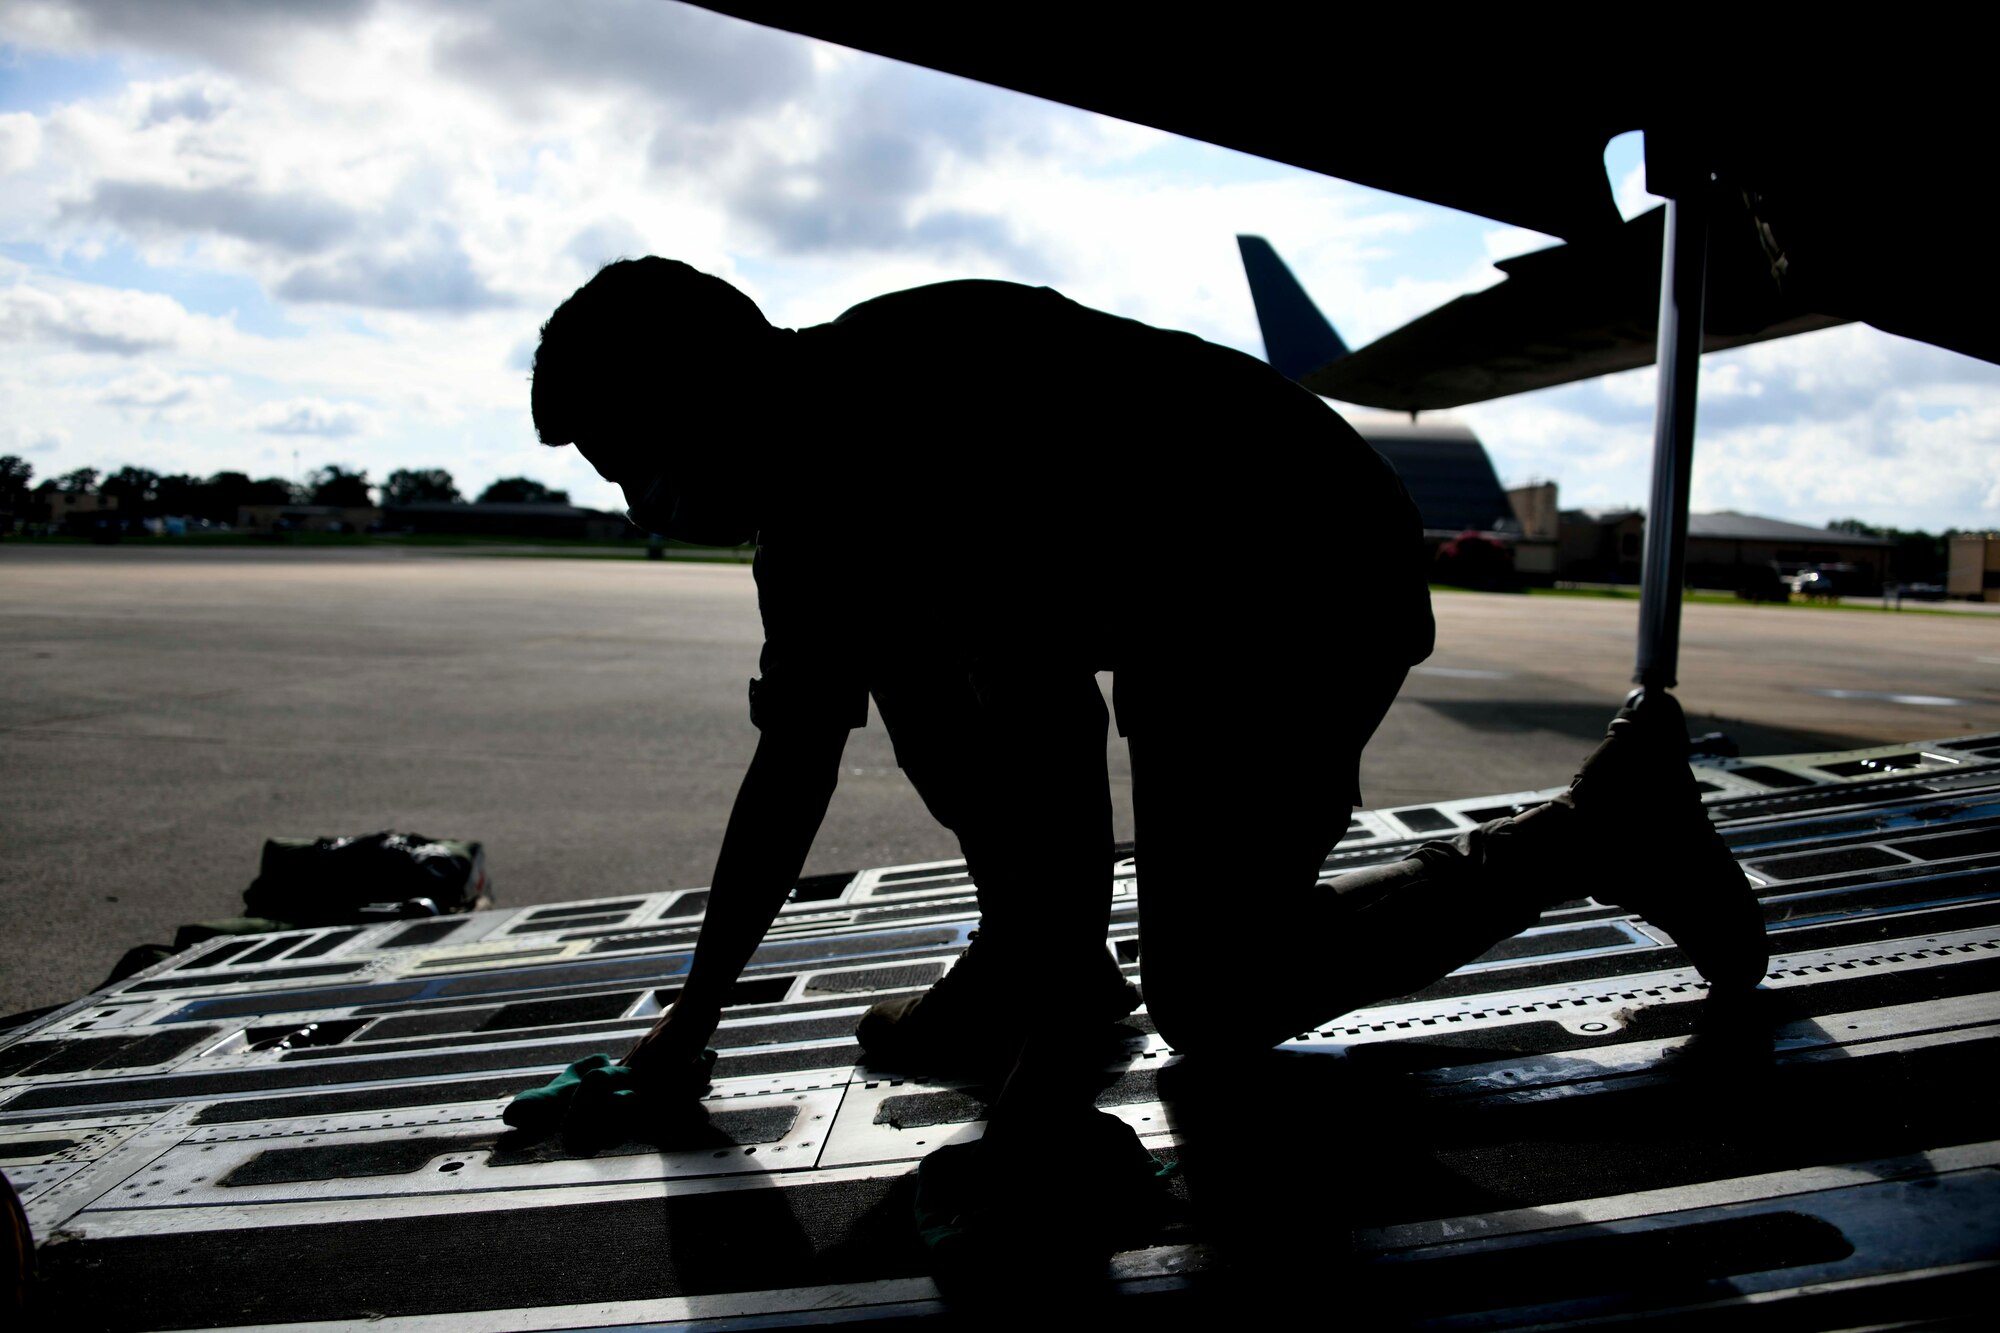 U.S. Air Force Airman 1st Class Manuel Arias, 316th Aeromedical Staging Facility medical technician, wipes off the hatch of a C-17 Globemaster III at Joint Base-Andrews, Maryland, Aug. 13, 2020. In addition to tending to patients’ medical needs, technicians ensure the safety of patients and staff by taking extra precautions, such as wiping off potentially slippery surfaces. (U.S. Air Force photo by Airman 1st Class Spencer Slocum)